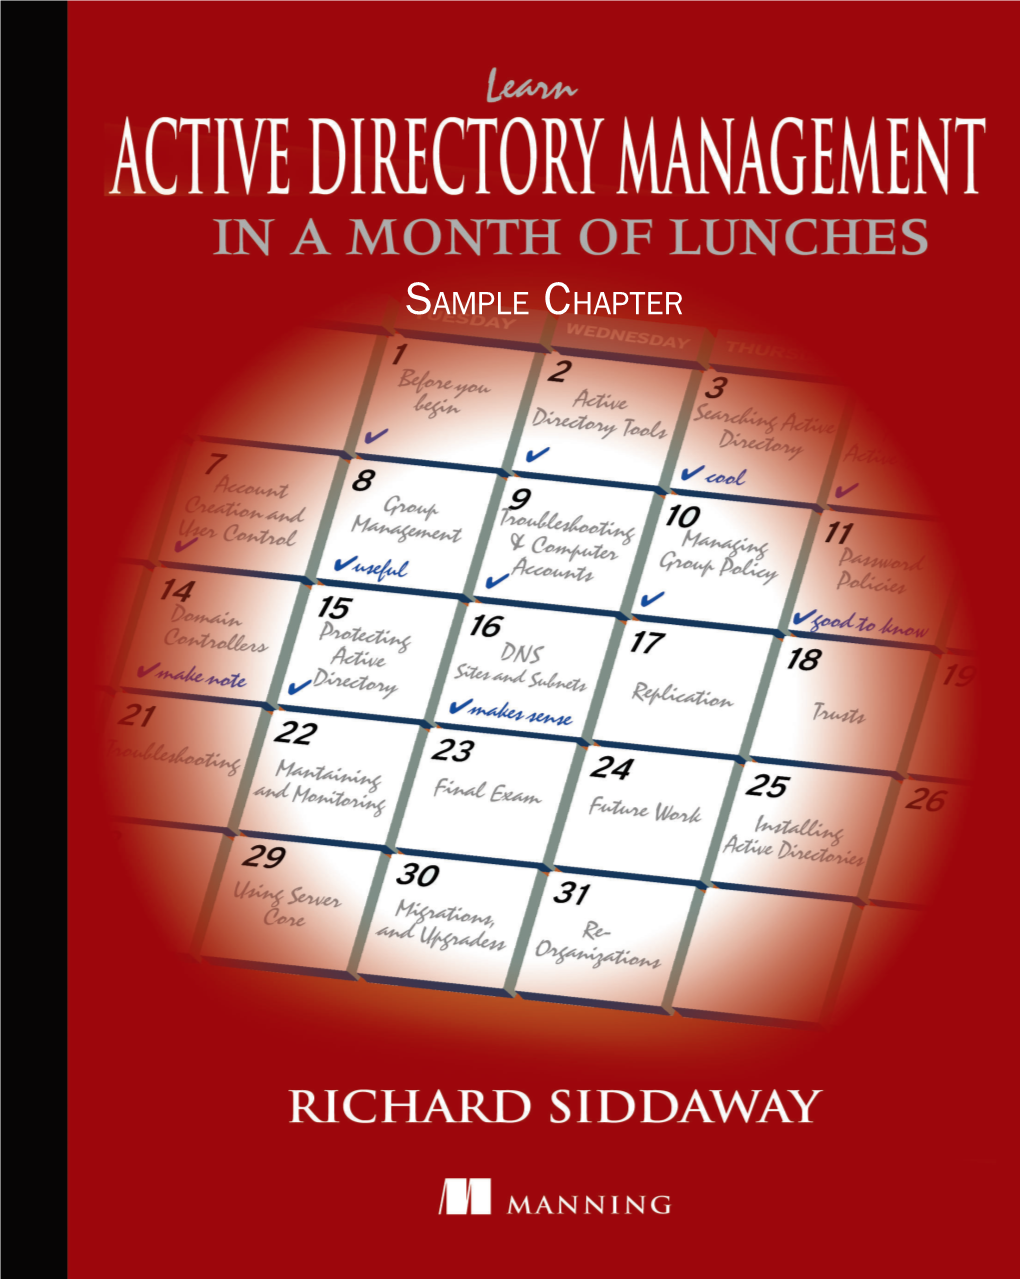 Learn Active Directory Management in a Month of Lunches by Richard Siddaway